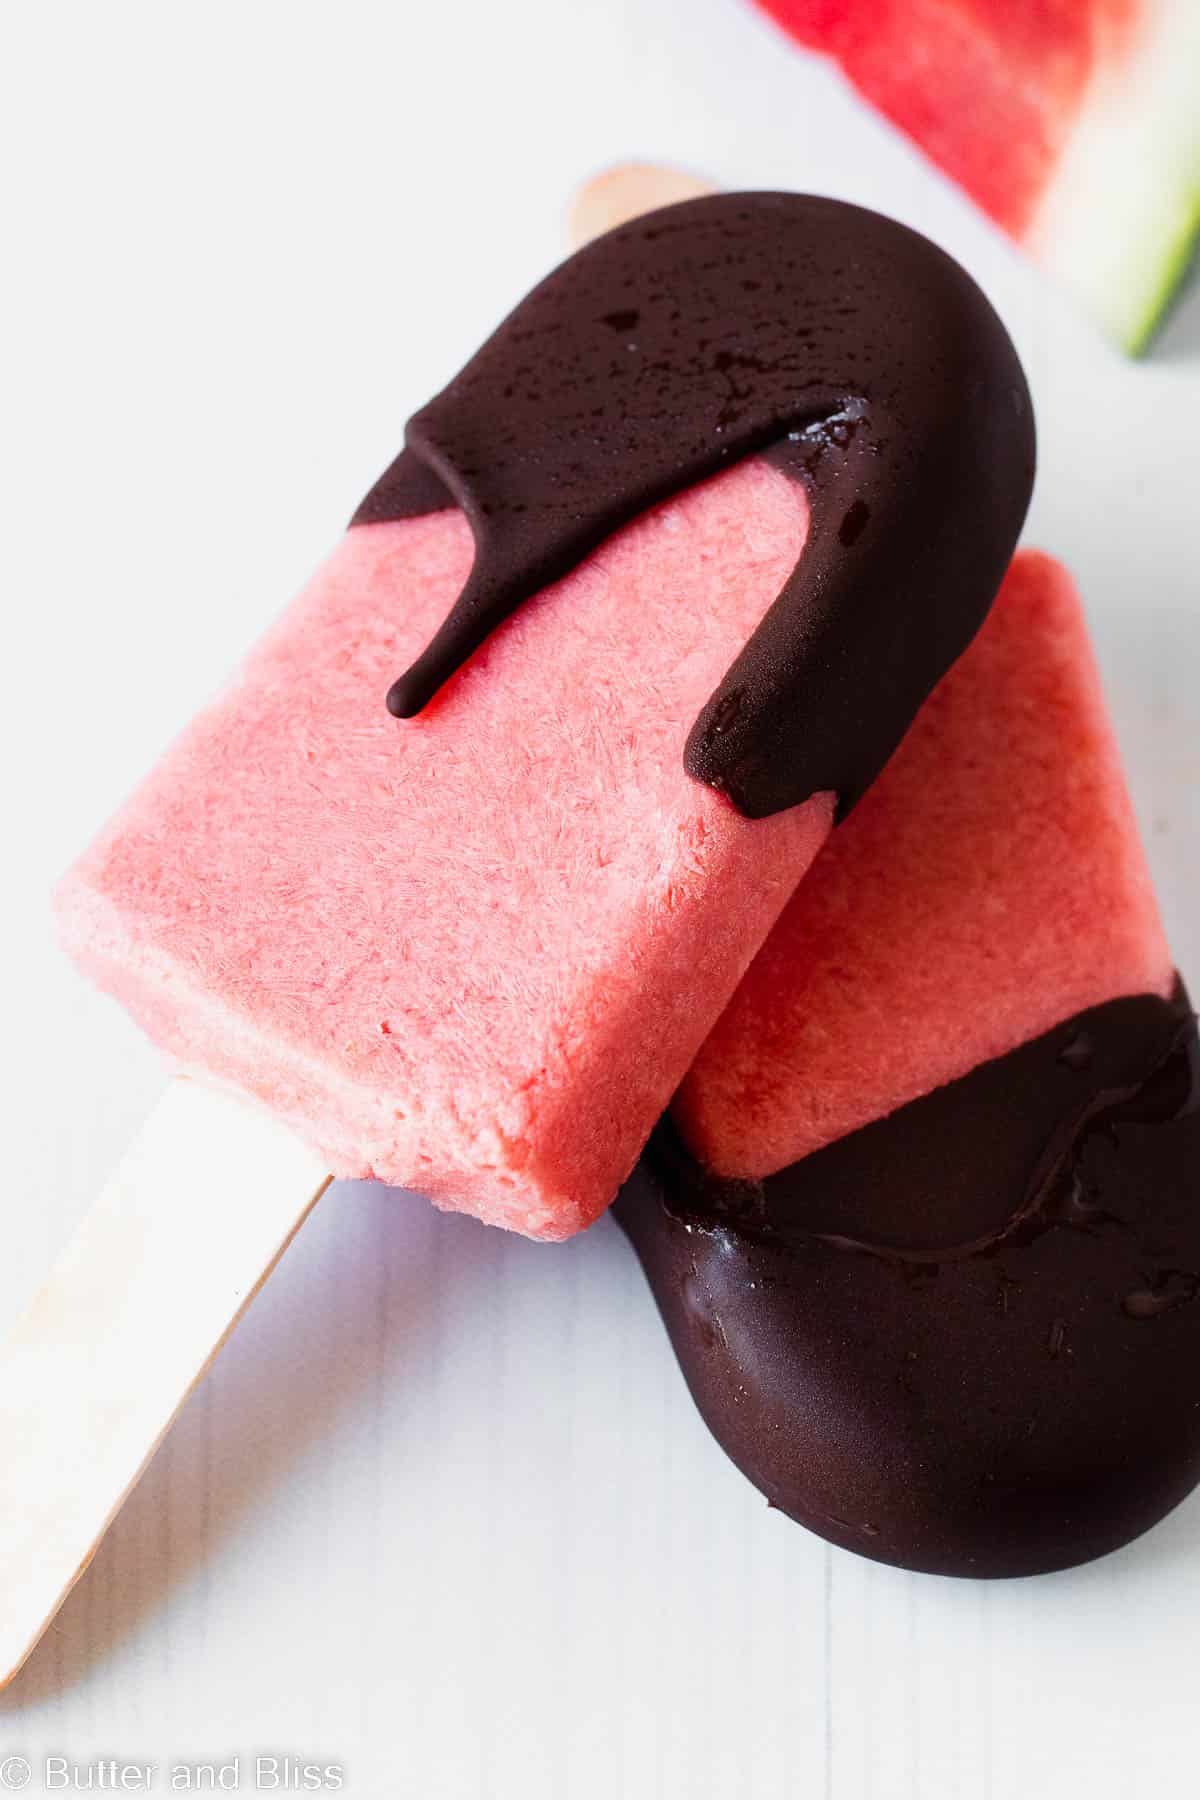 Pretty pink watermelon popsicle with chocolate magic shell next to a watermelon slice.